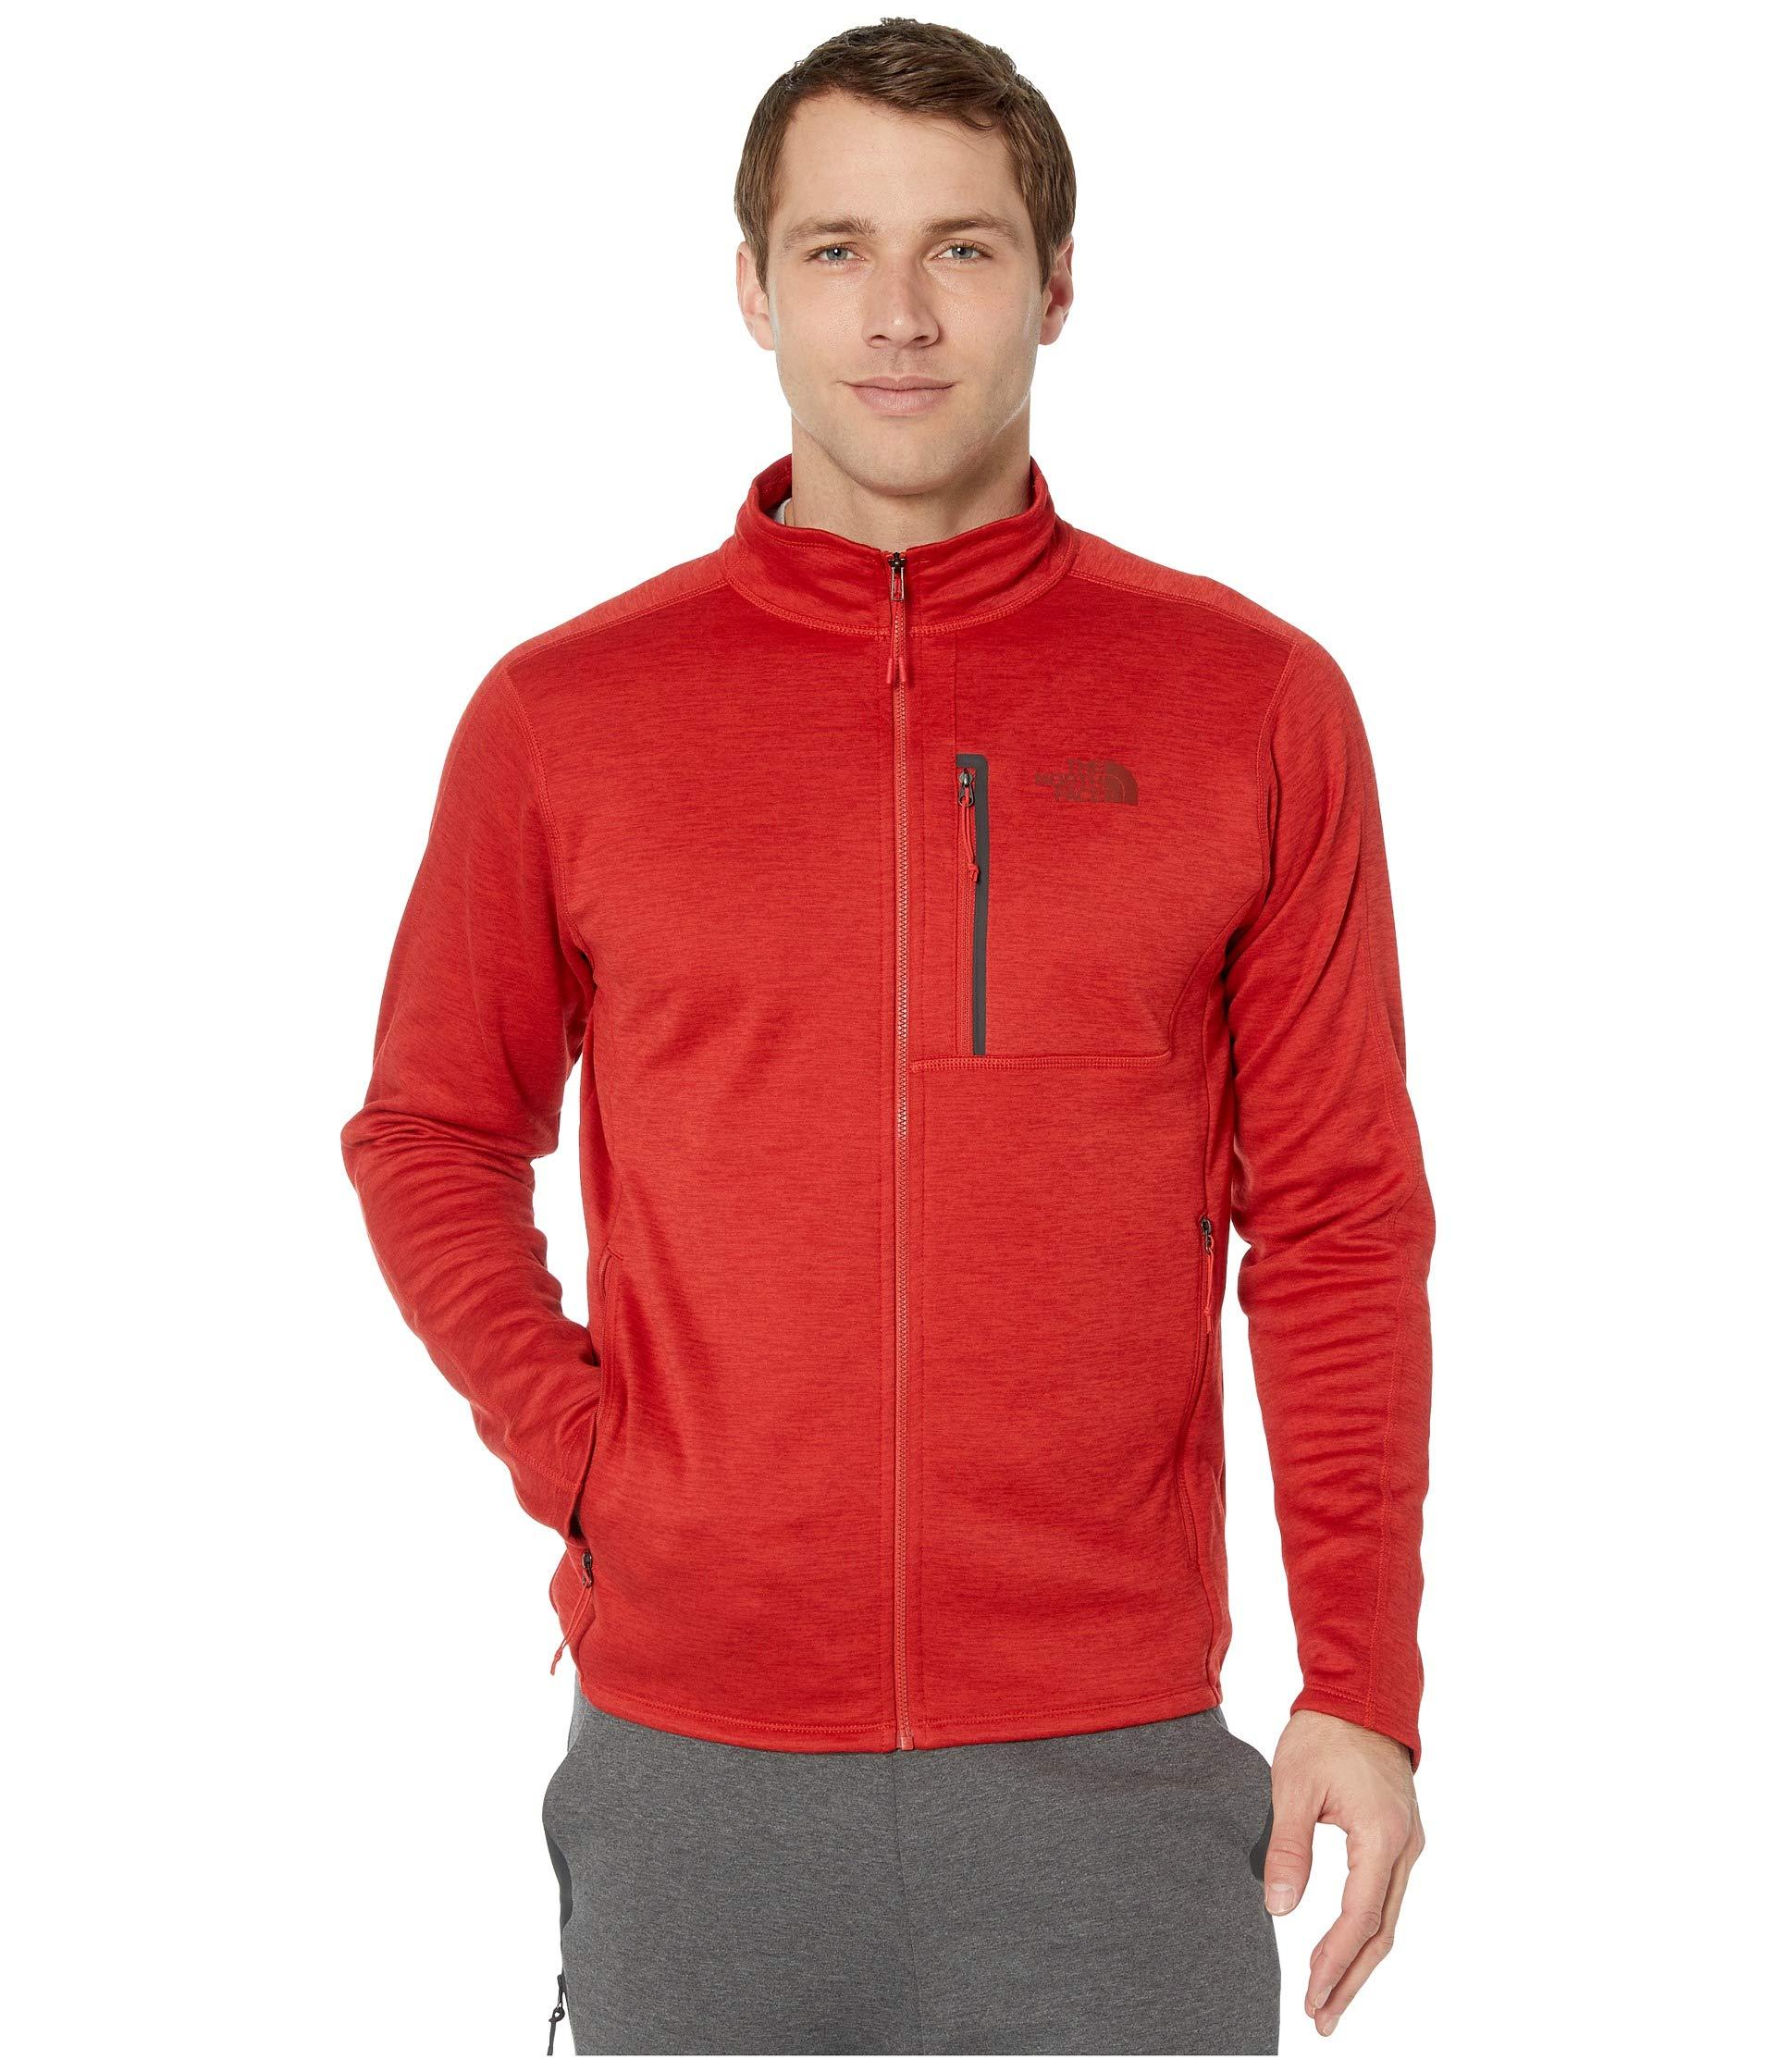 The North Face Fleece Canyonlands Full Zip in Red for Men - Lyst